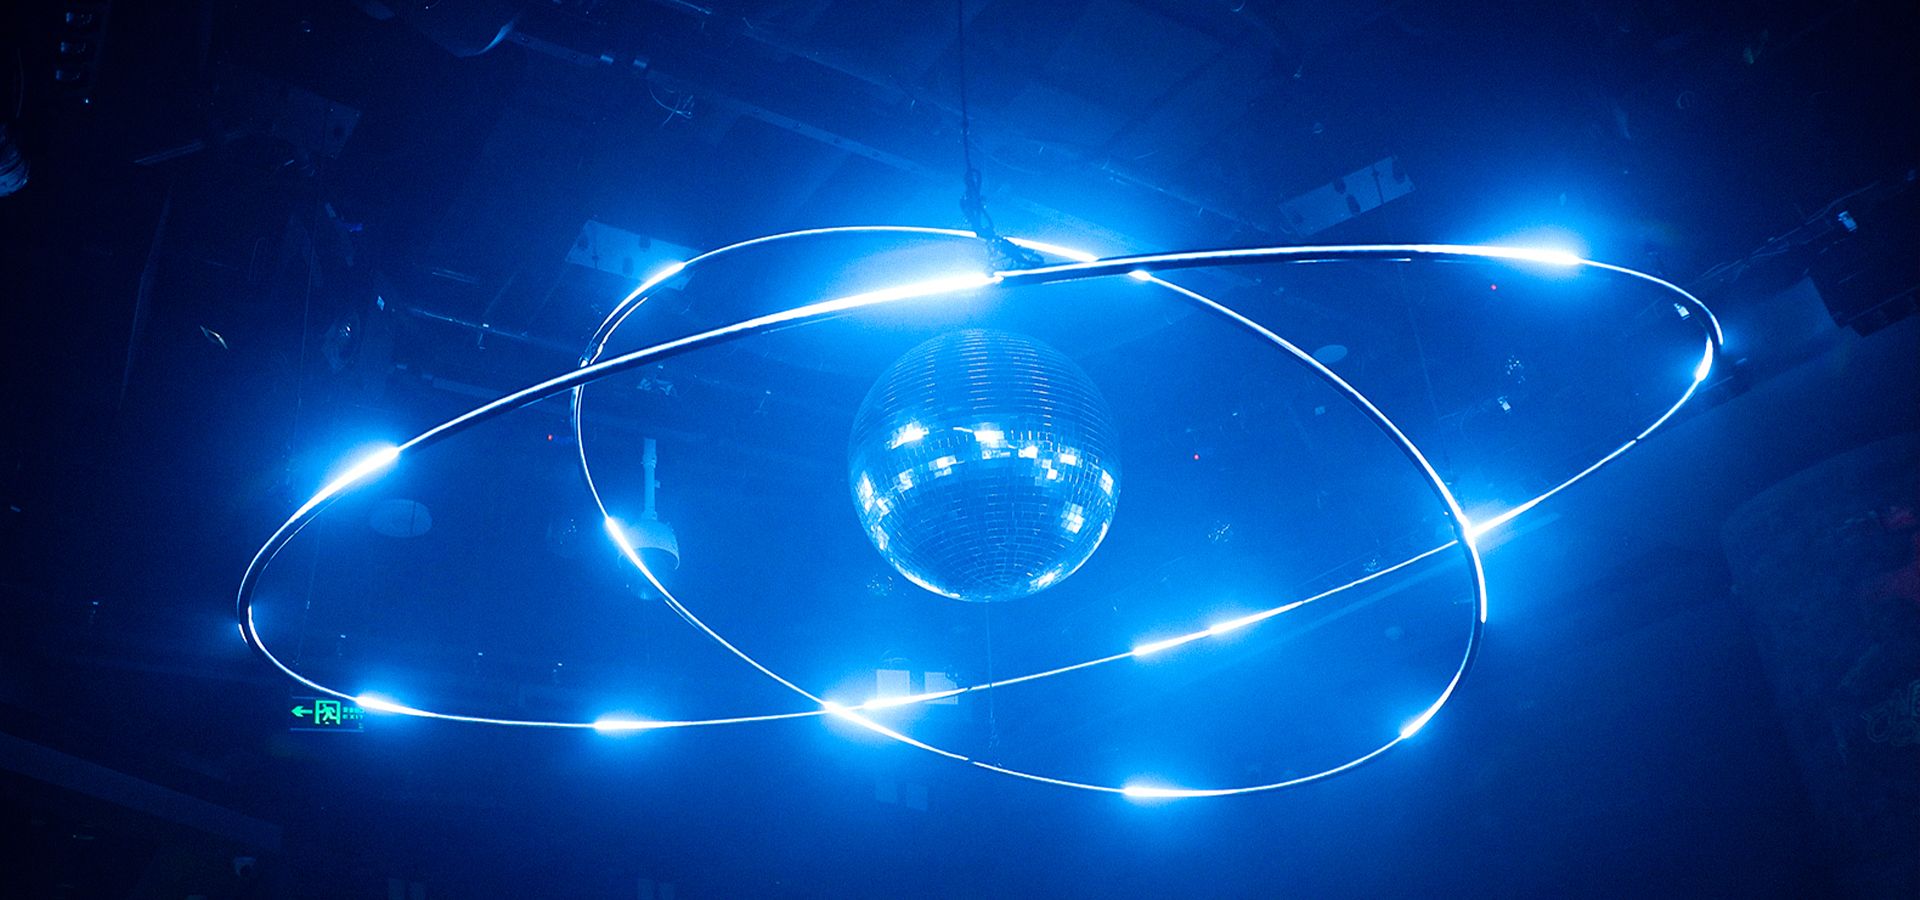 Kinetic Lights in the club can enhance the overall atmosphere